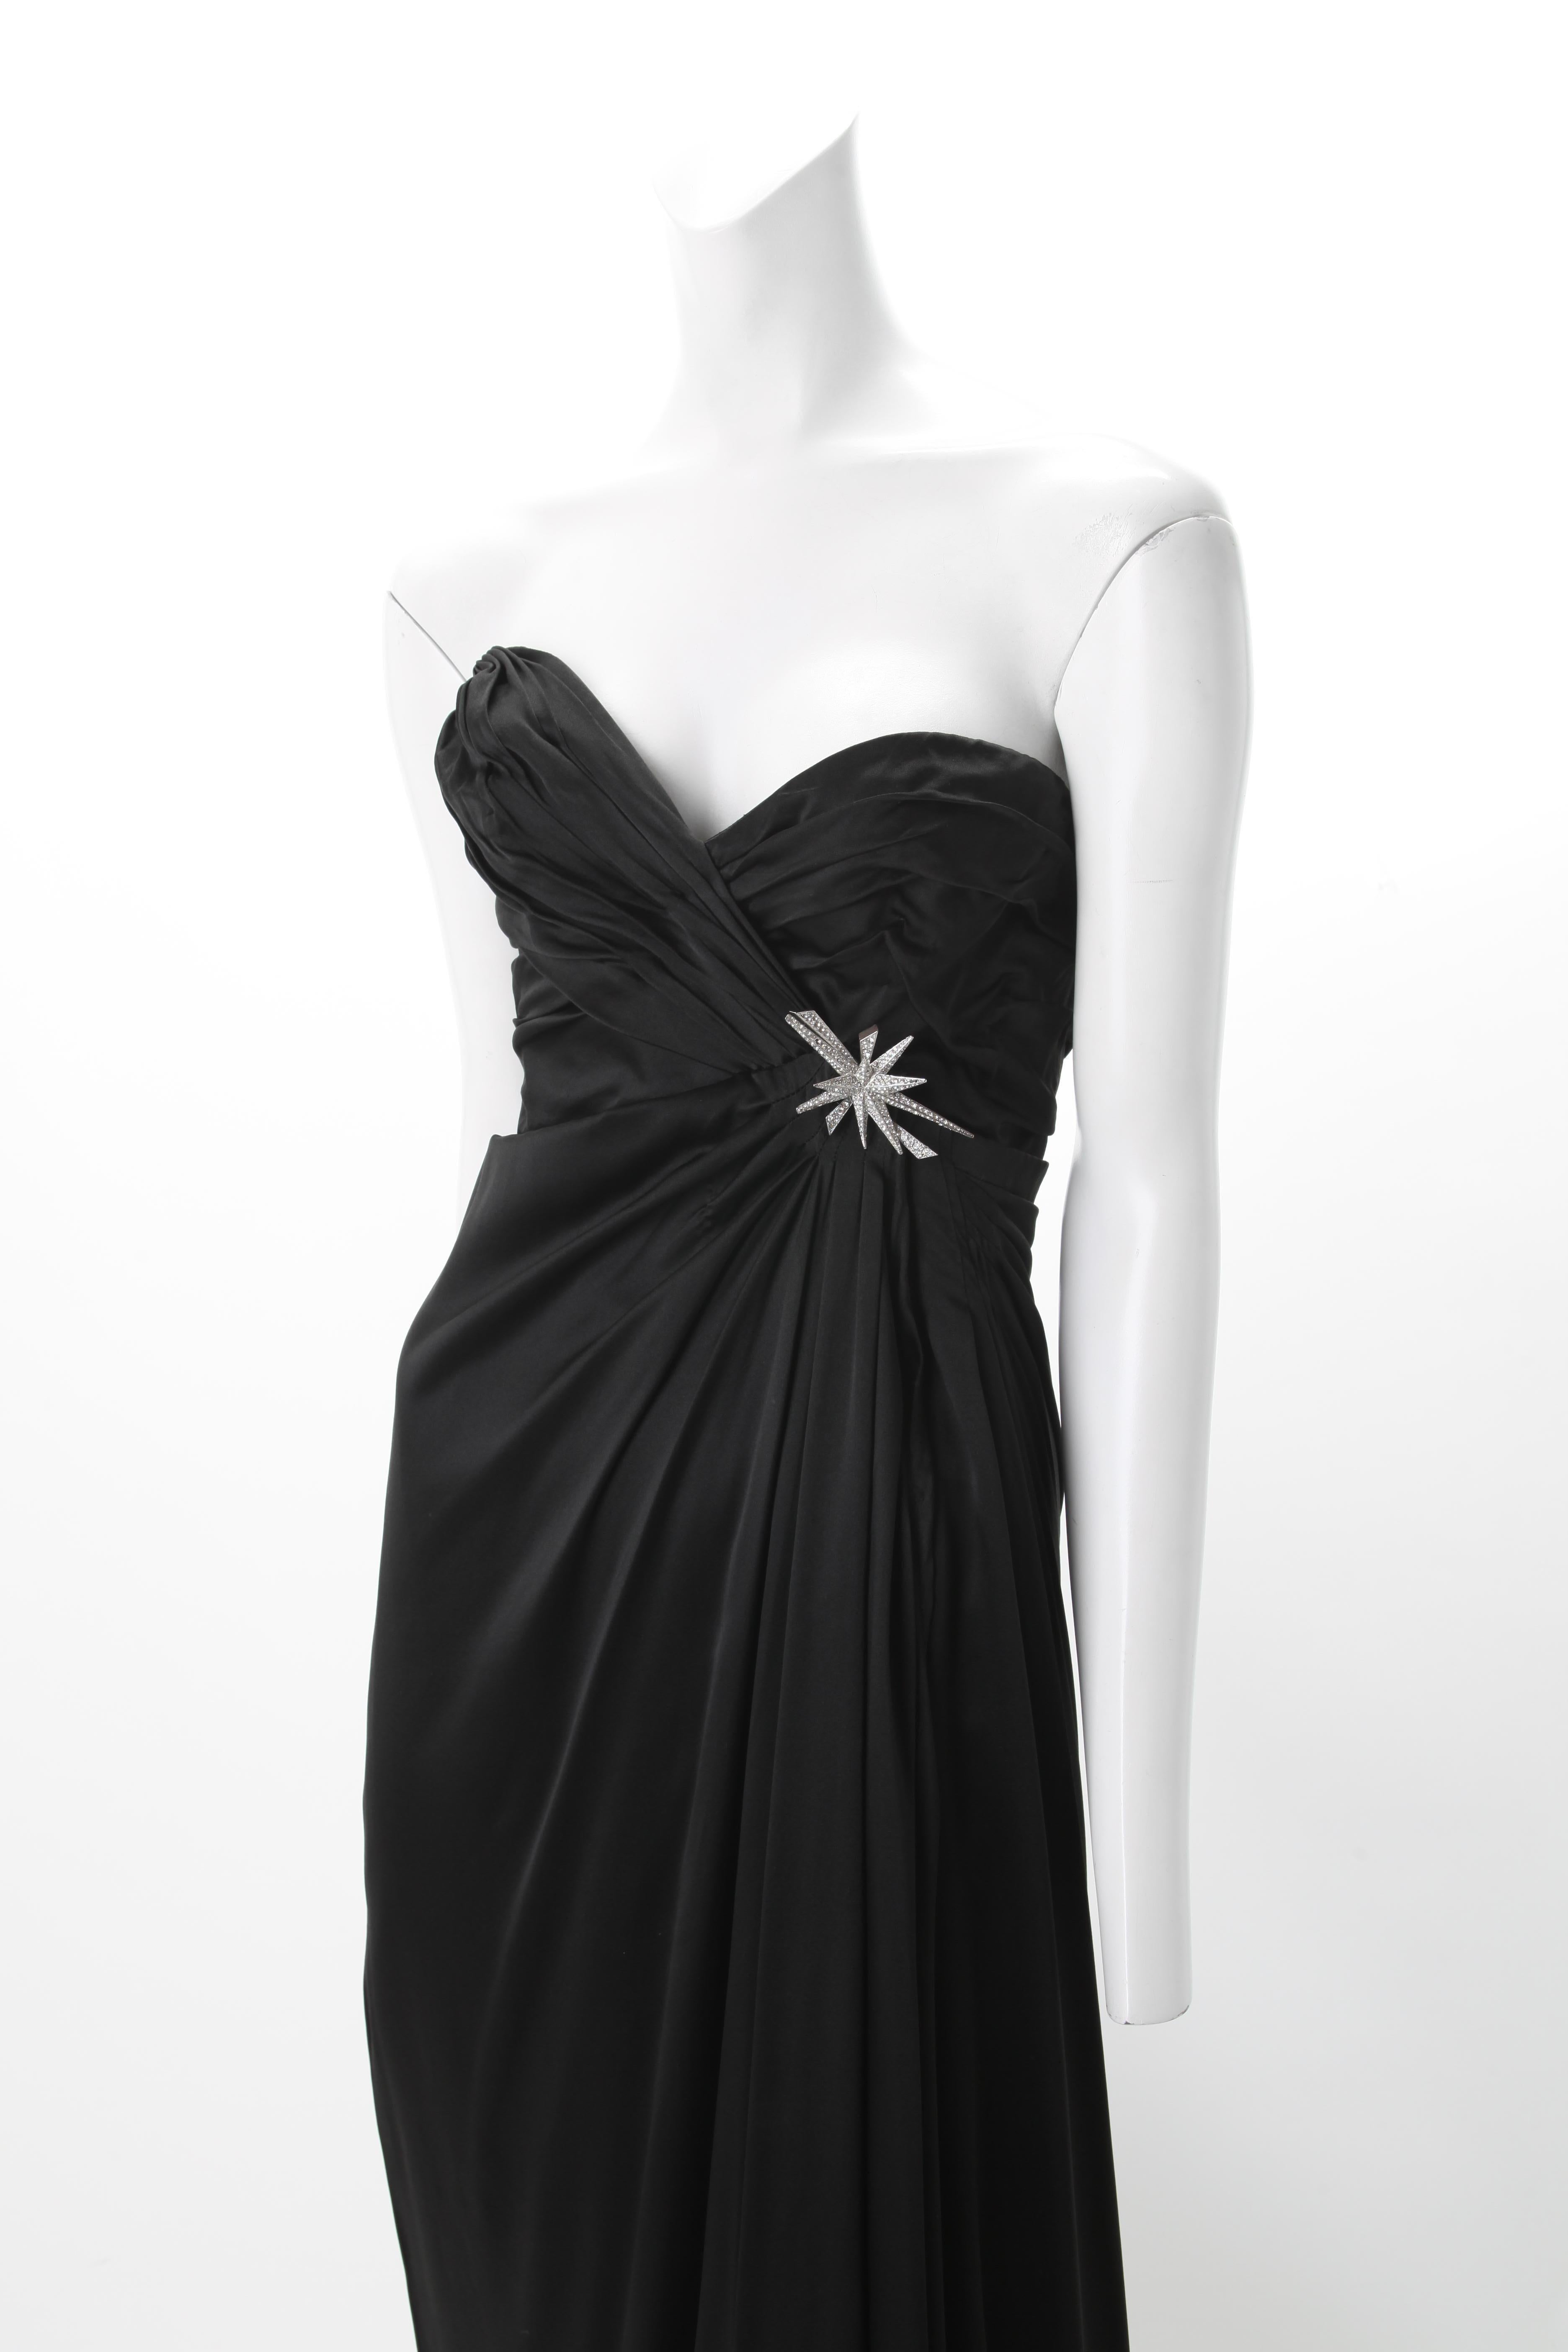 Thierry Mugler Strapless Black Satin Gown, c.1980s
Thierry Mugler Strapless Black Satin Gown featuring asymmetrical, gathered corseted bodice with rhinestone brooch accent. Skirt features gathered pleats from brooch at left side waistline cascading